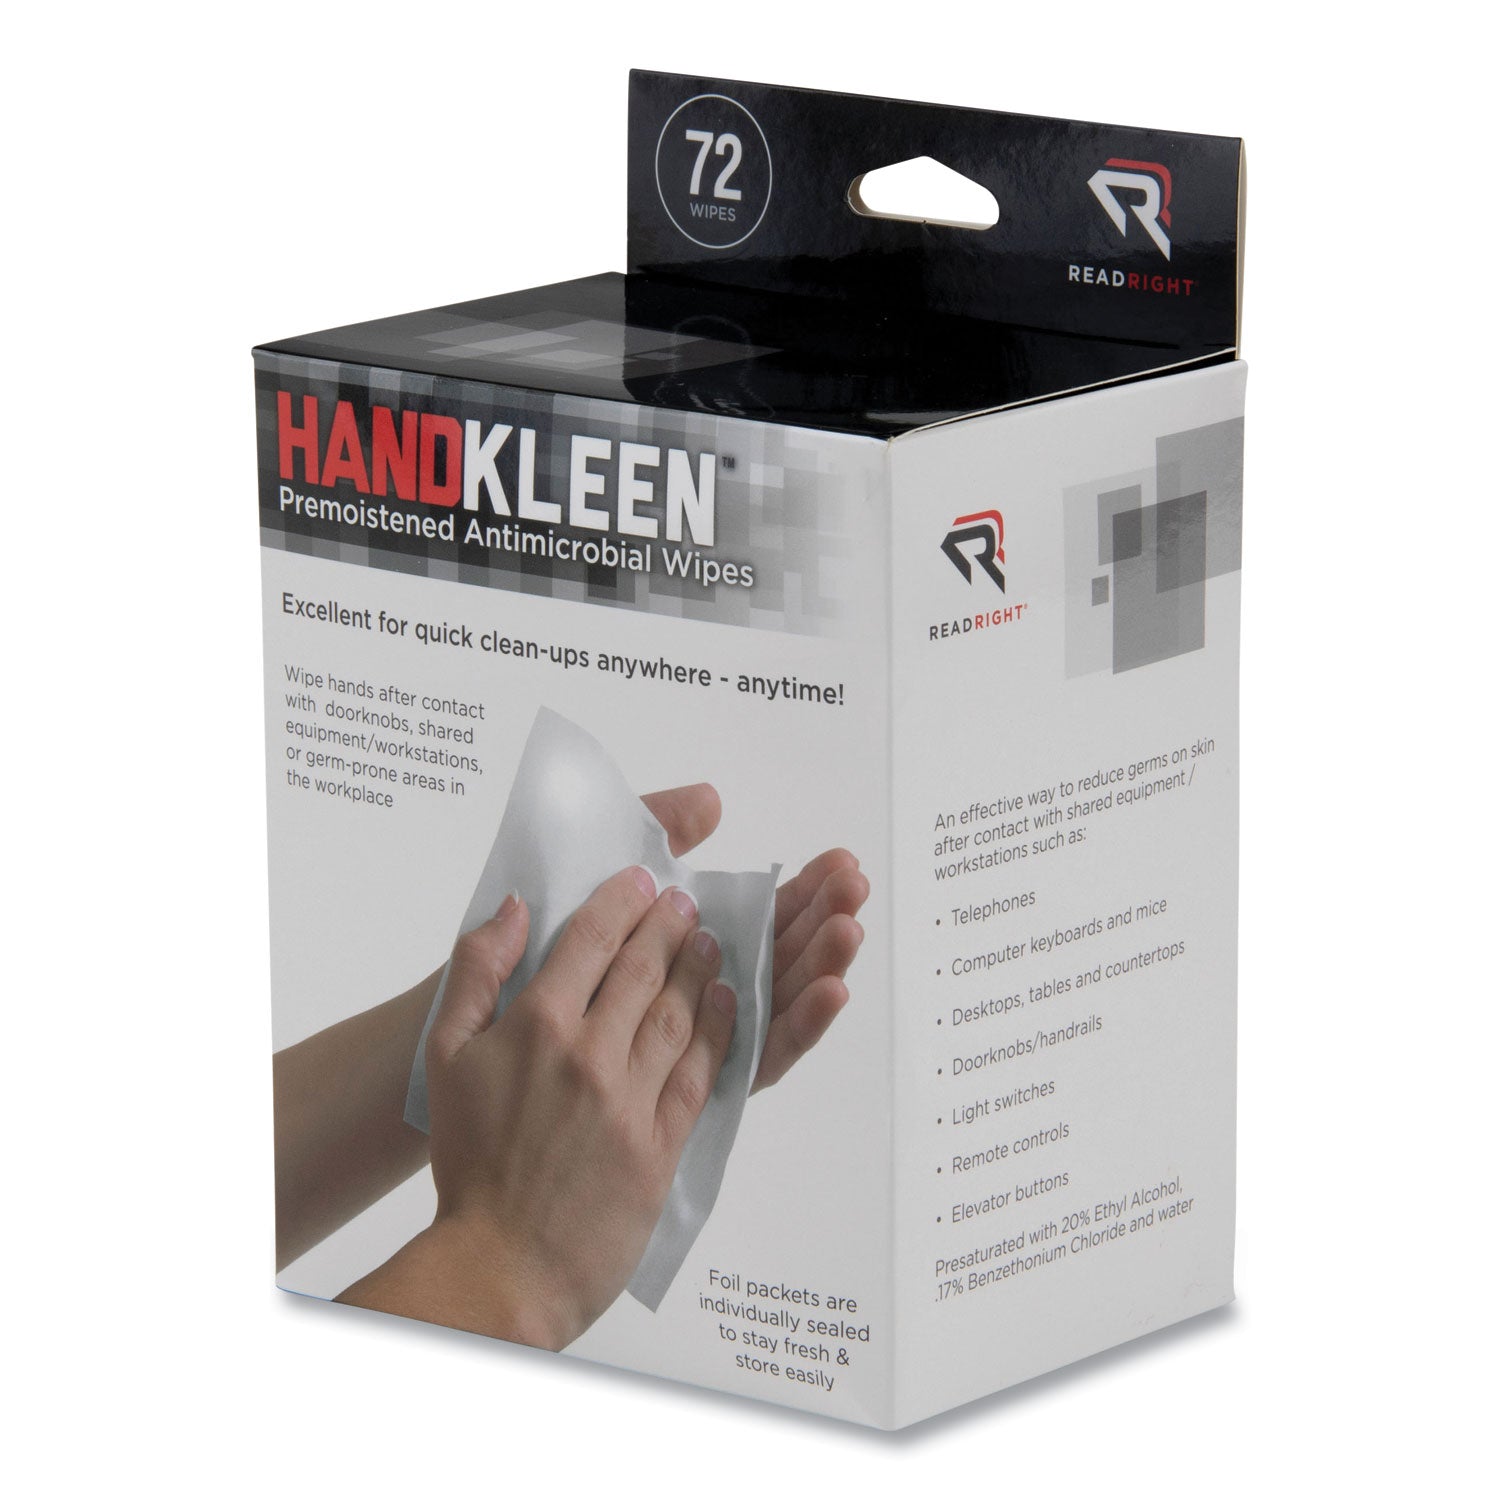 handkleen-premoistened-antibacterial-wipes-7-x-5-foil-packet-unscented-white-72-box_rearr15112 - 3